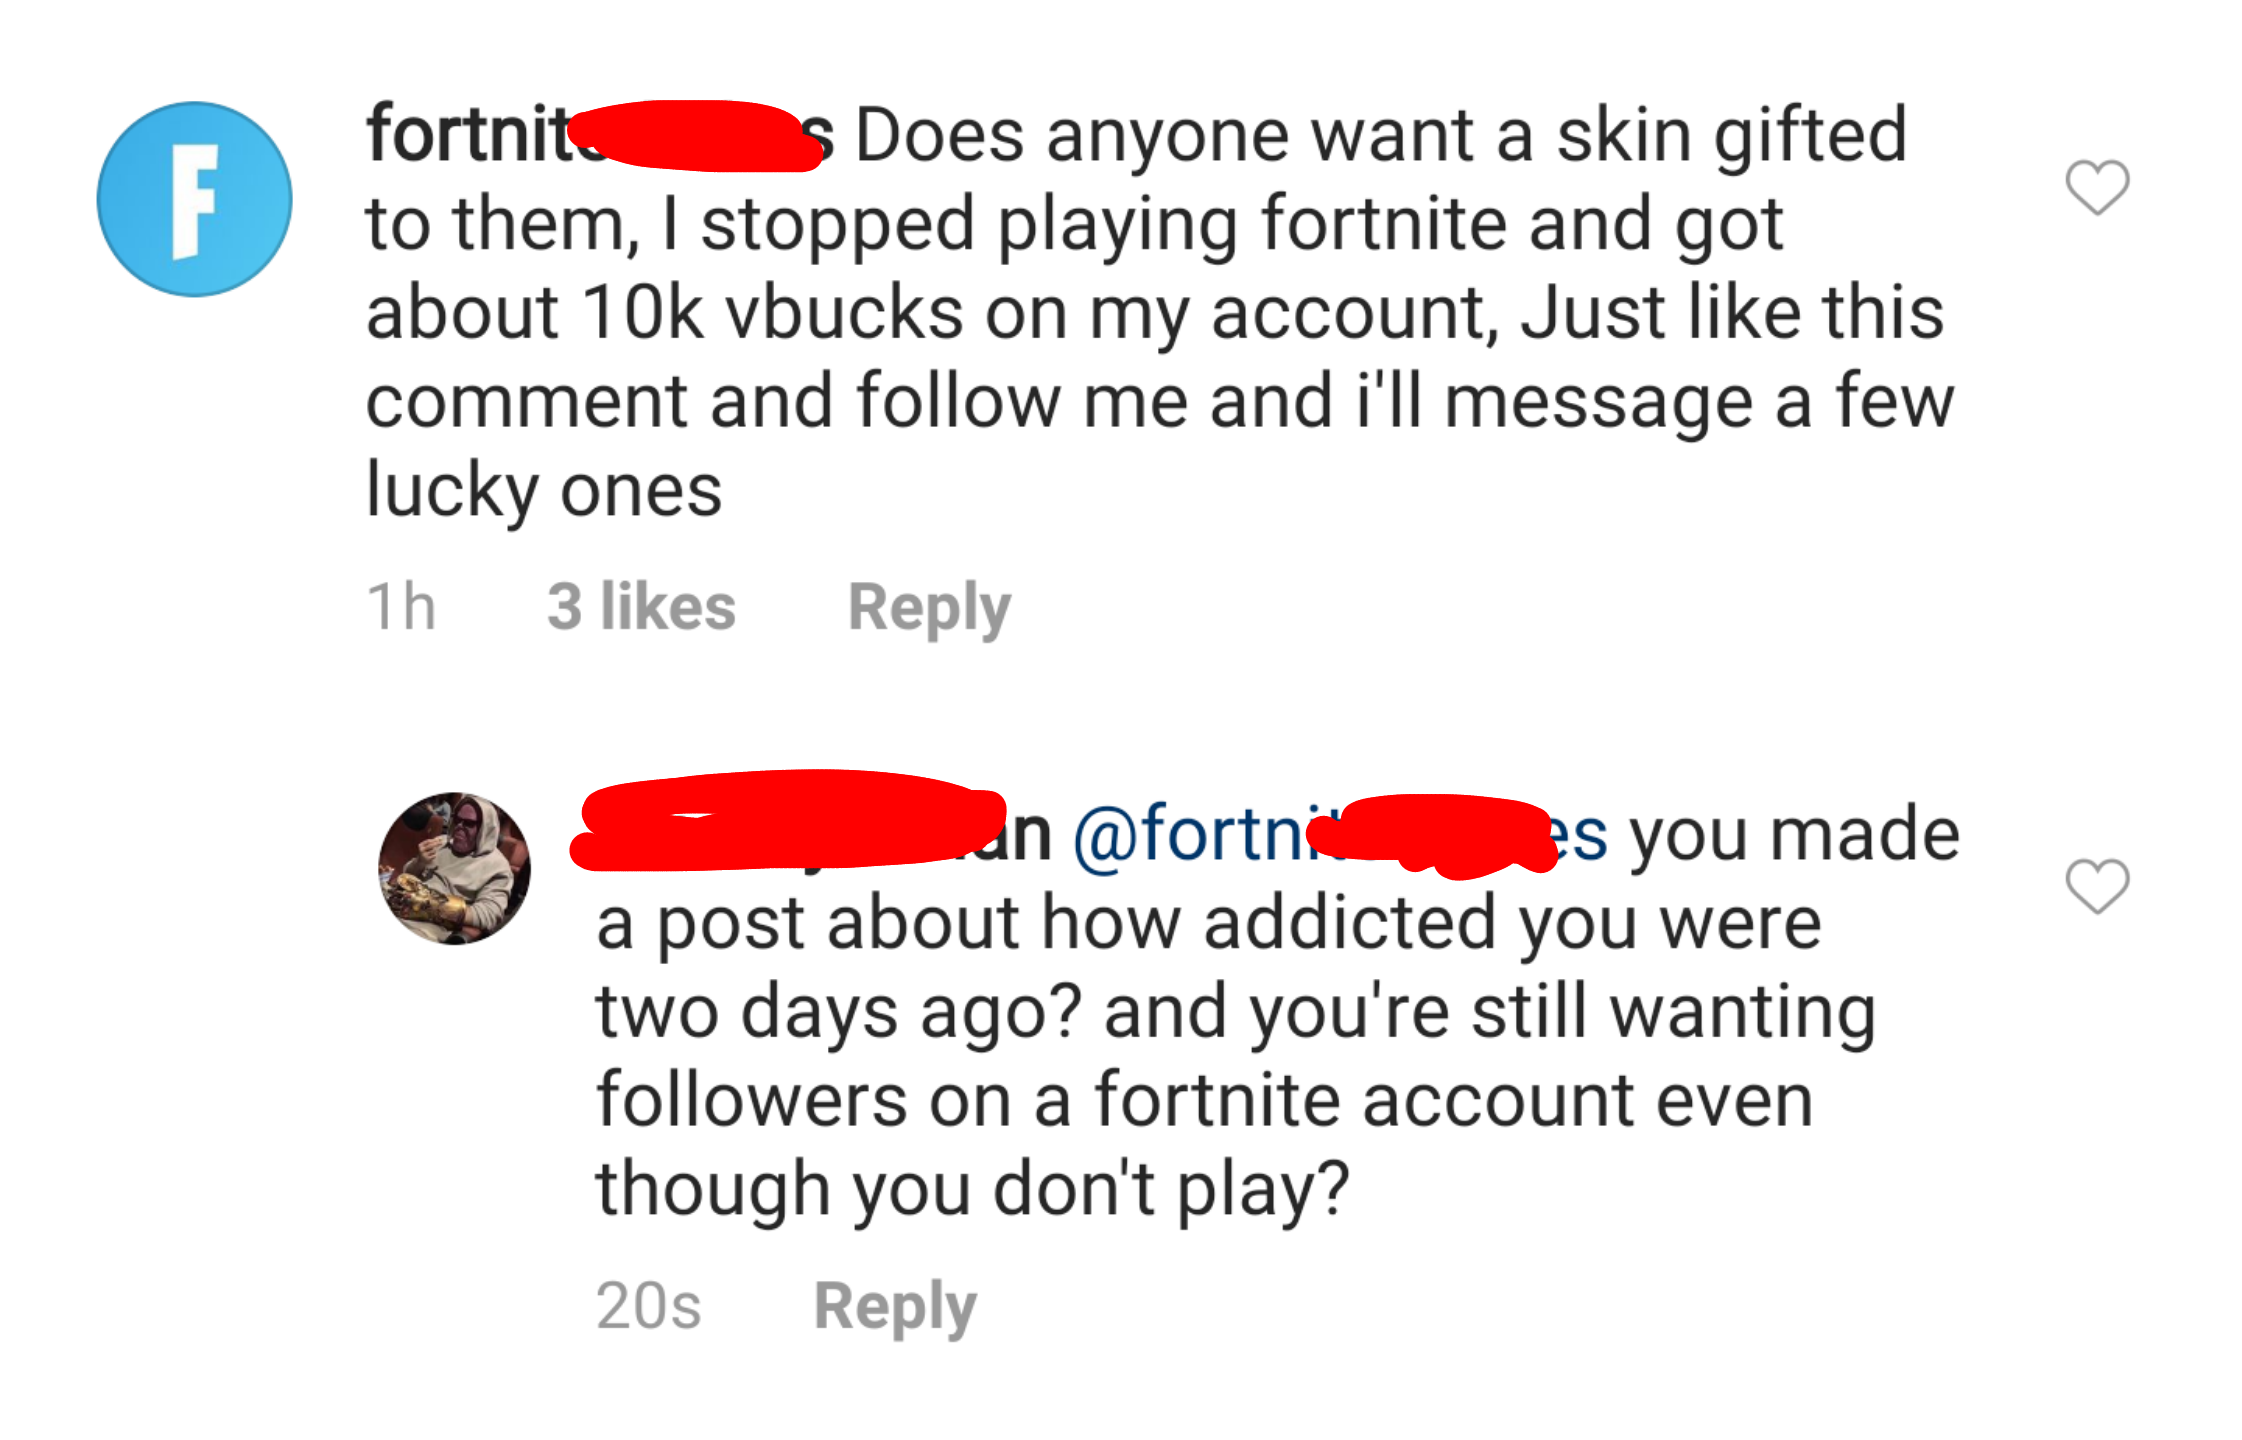 diagram - fortnit s Does anyone want a skin gifted to them, I stopped playing fortnite and got about 10k vbucks on my account, Just this comment and me and i'll message a few lucky ones 1h 3 n e s you made a post about how addicted you were two days ago? 